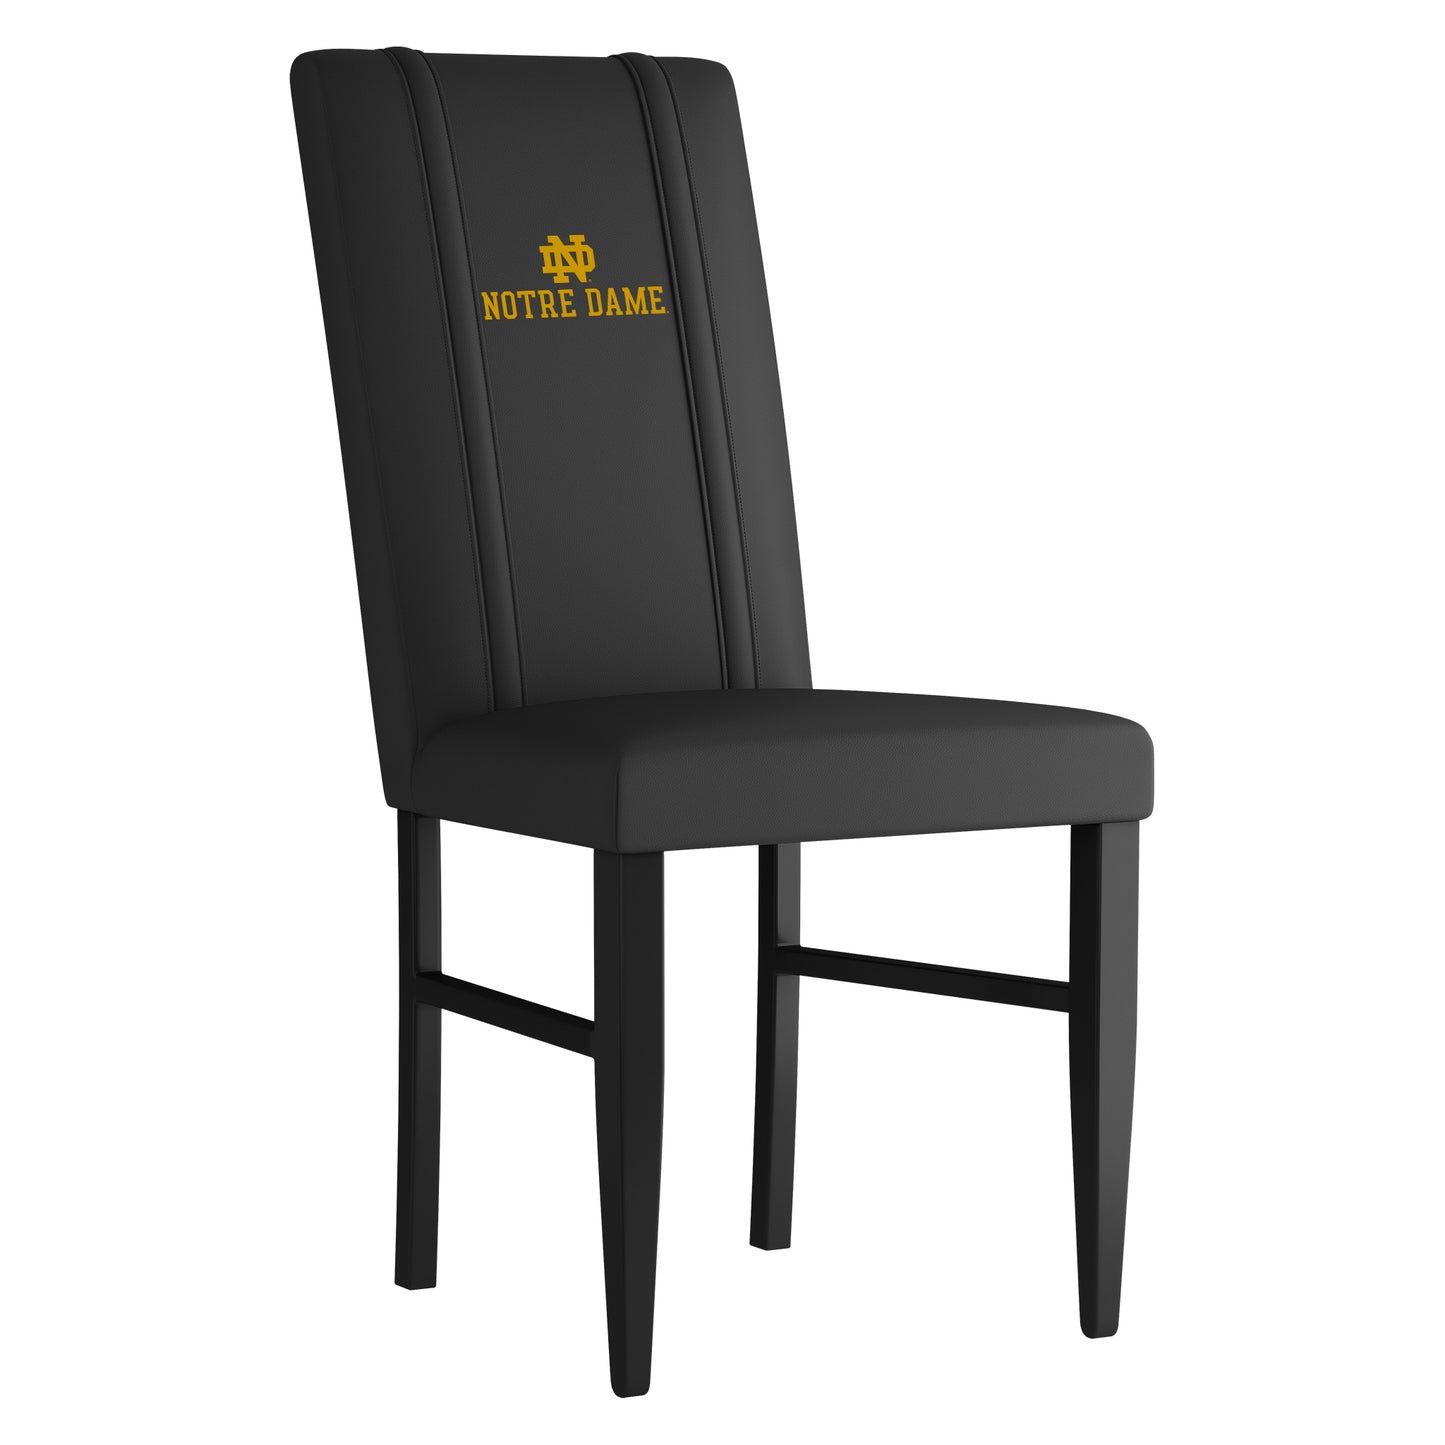 Side Chair 2000 with Notre Dame Wordmark Logo Set of 2